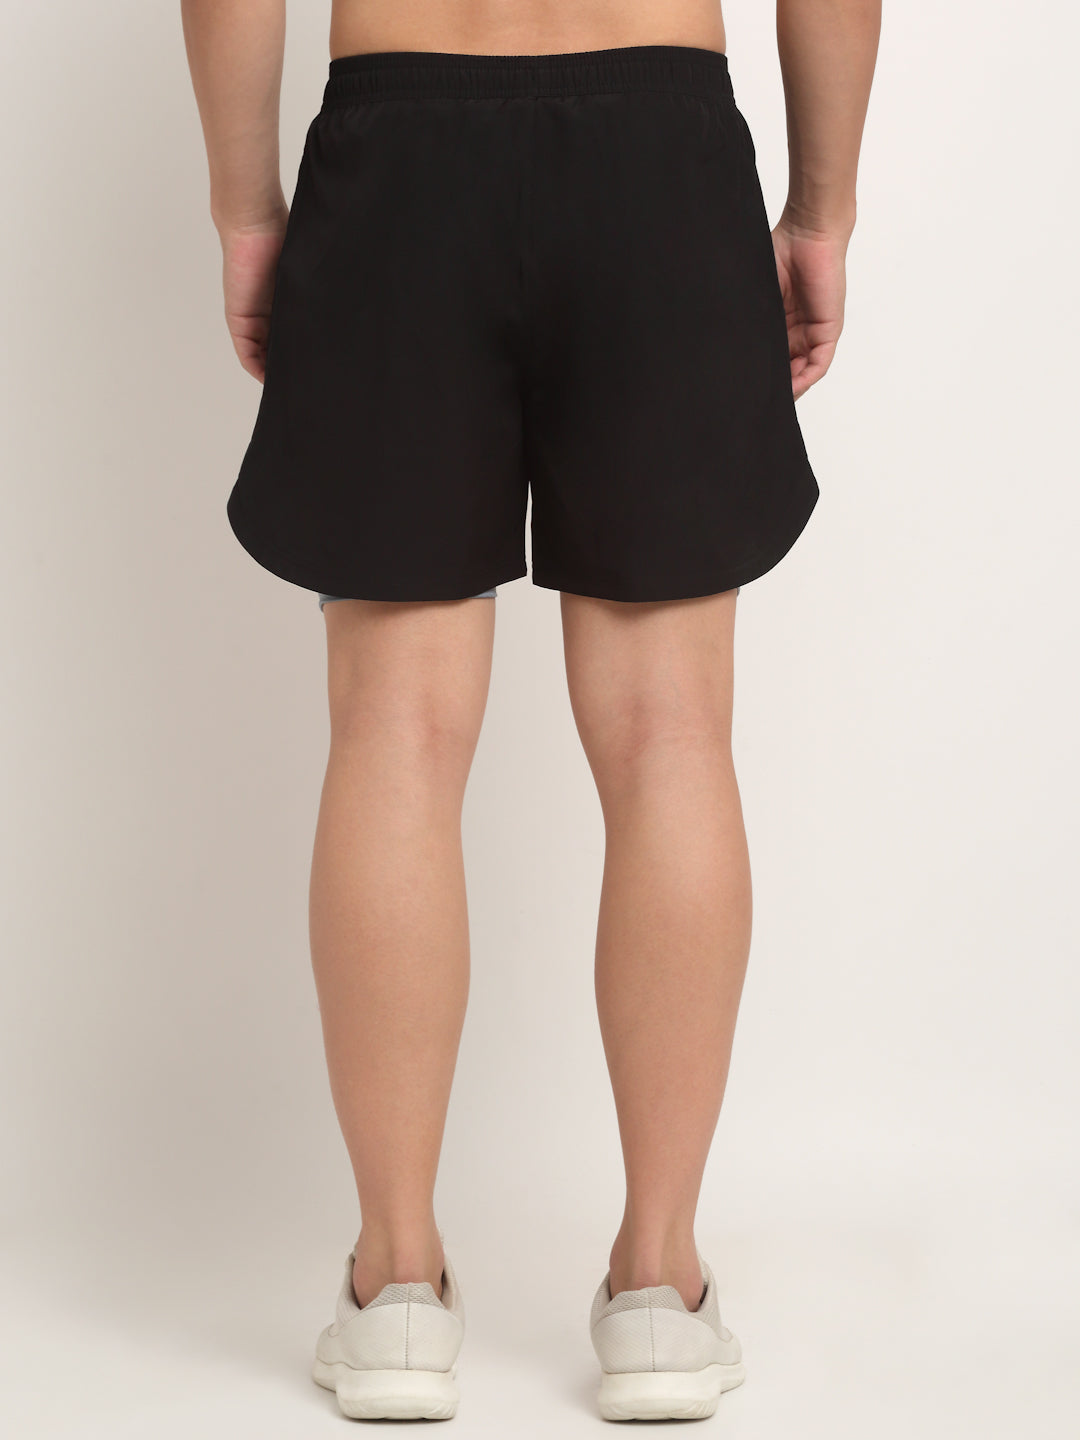 Invincible Men's Double Layered Shorts